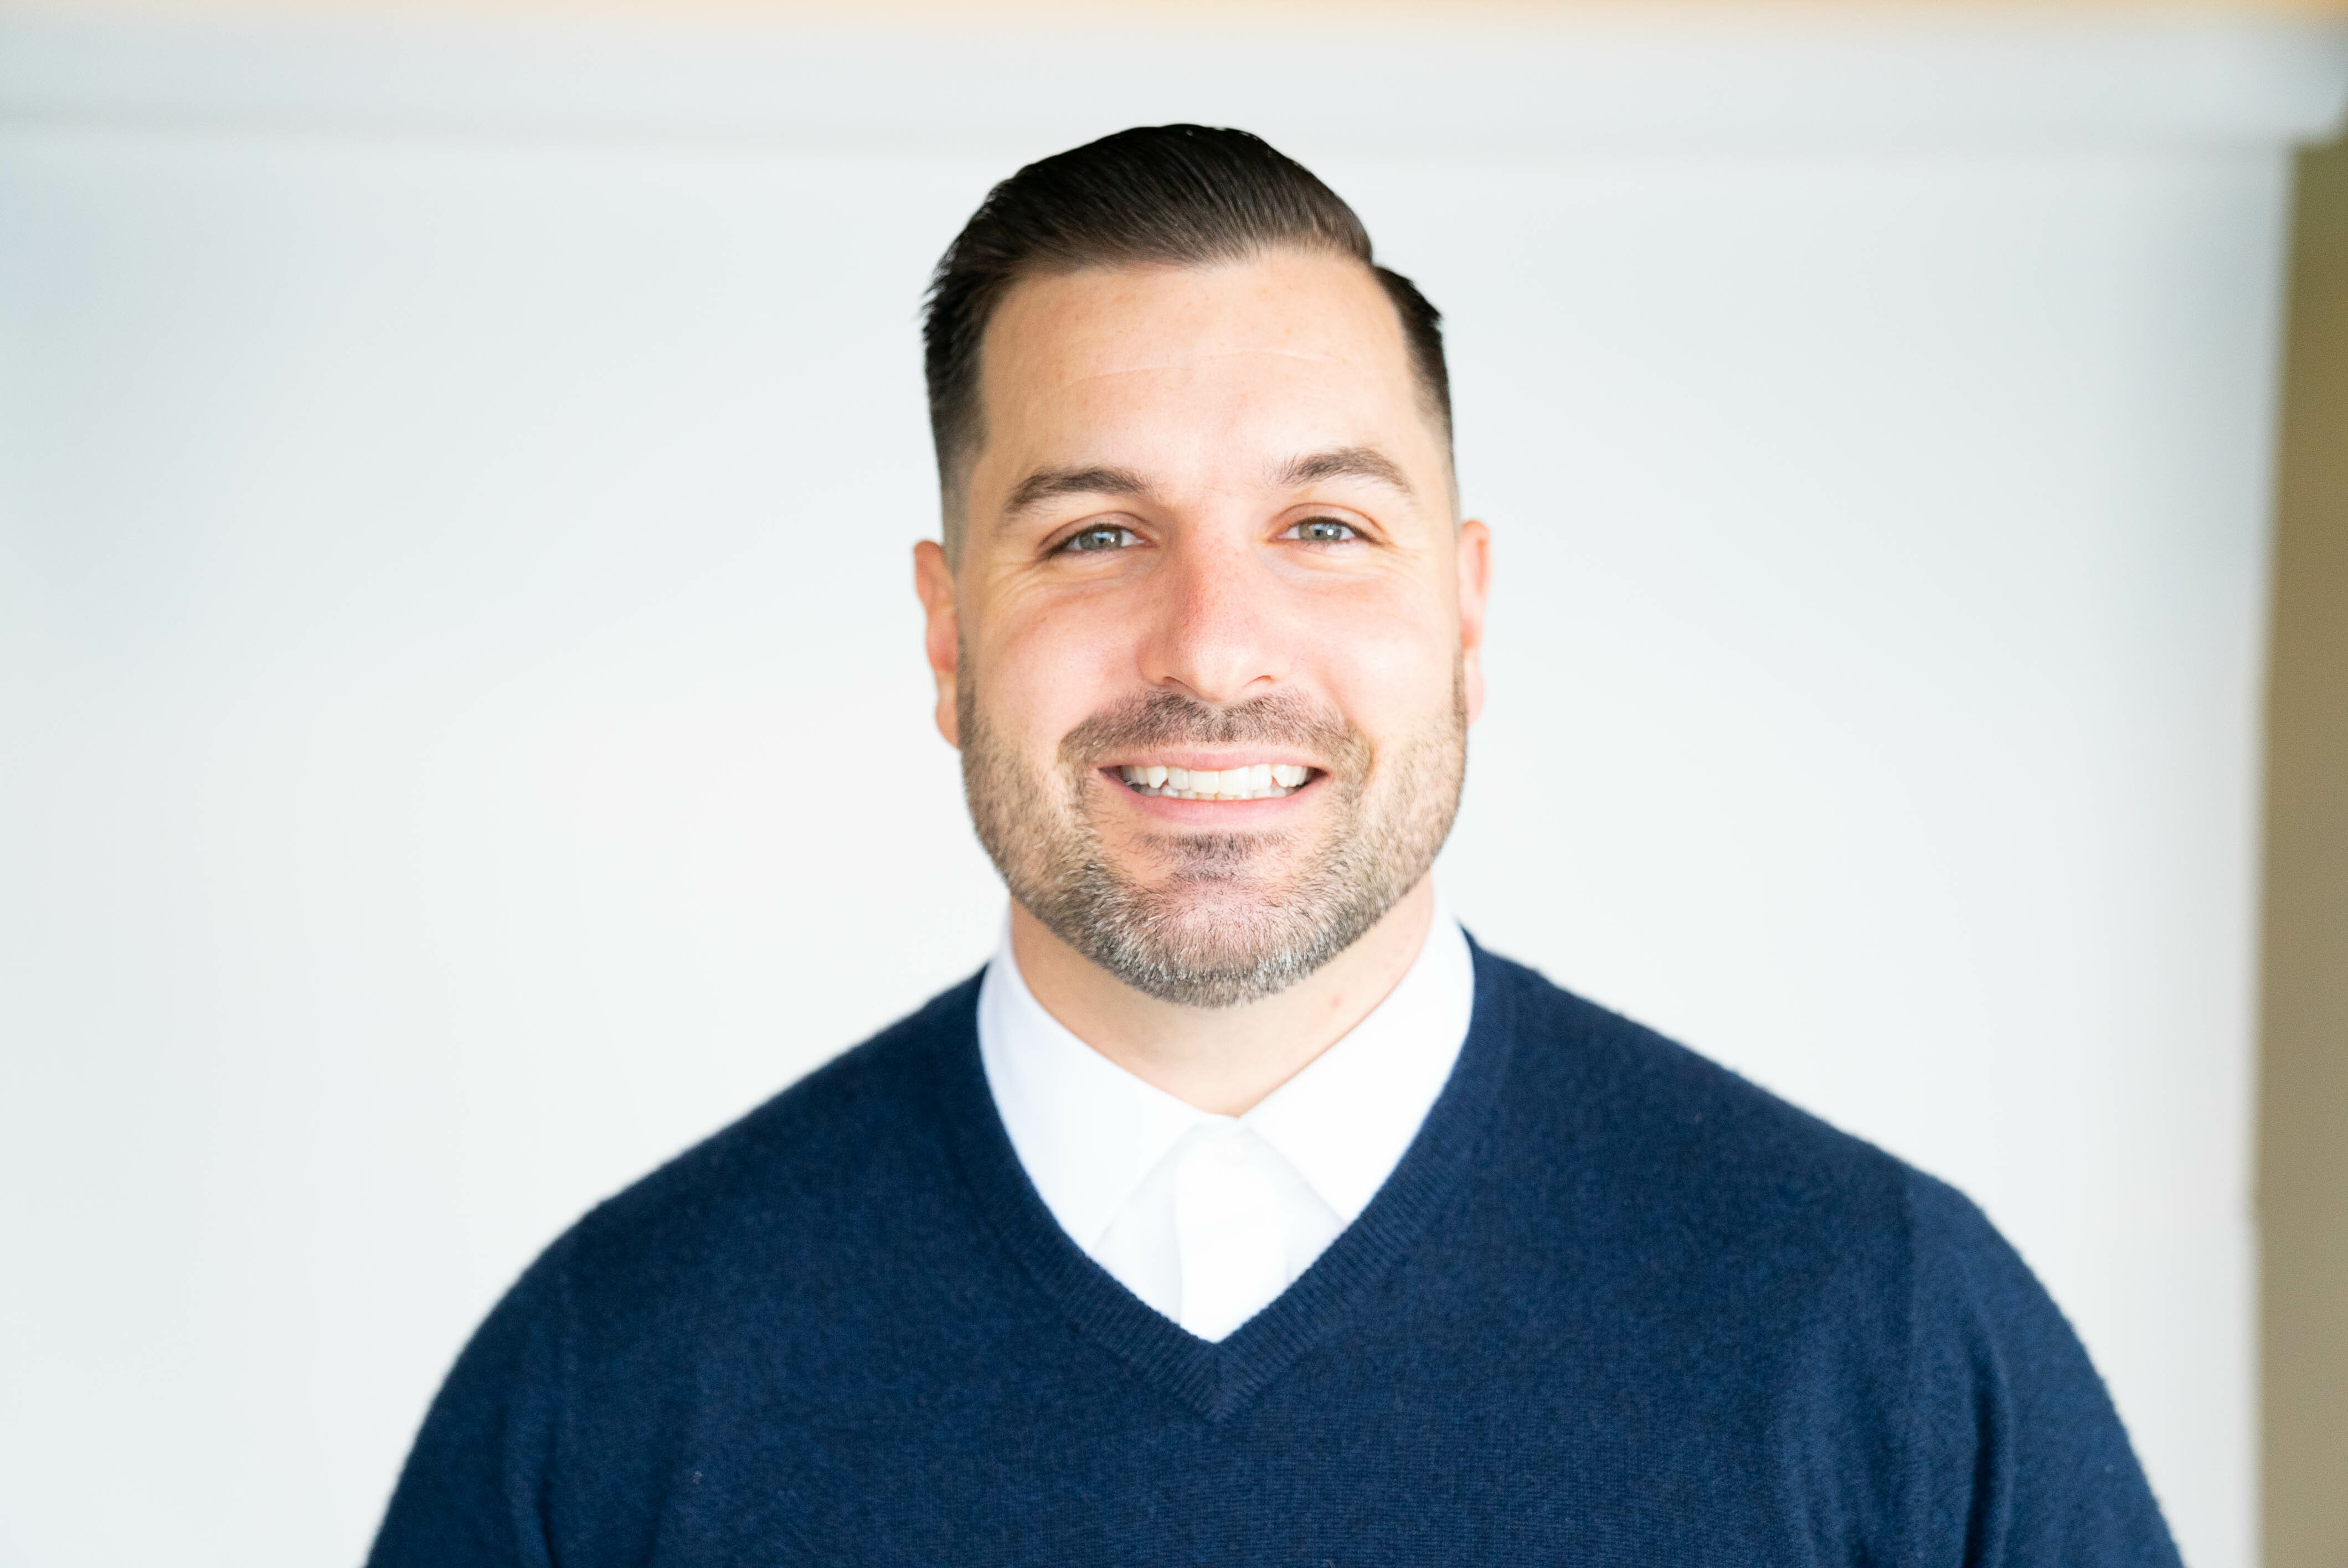 Ryan Knicely, REALTOR in Tacoma, Windermere